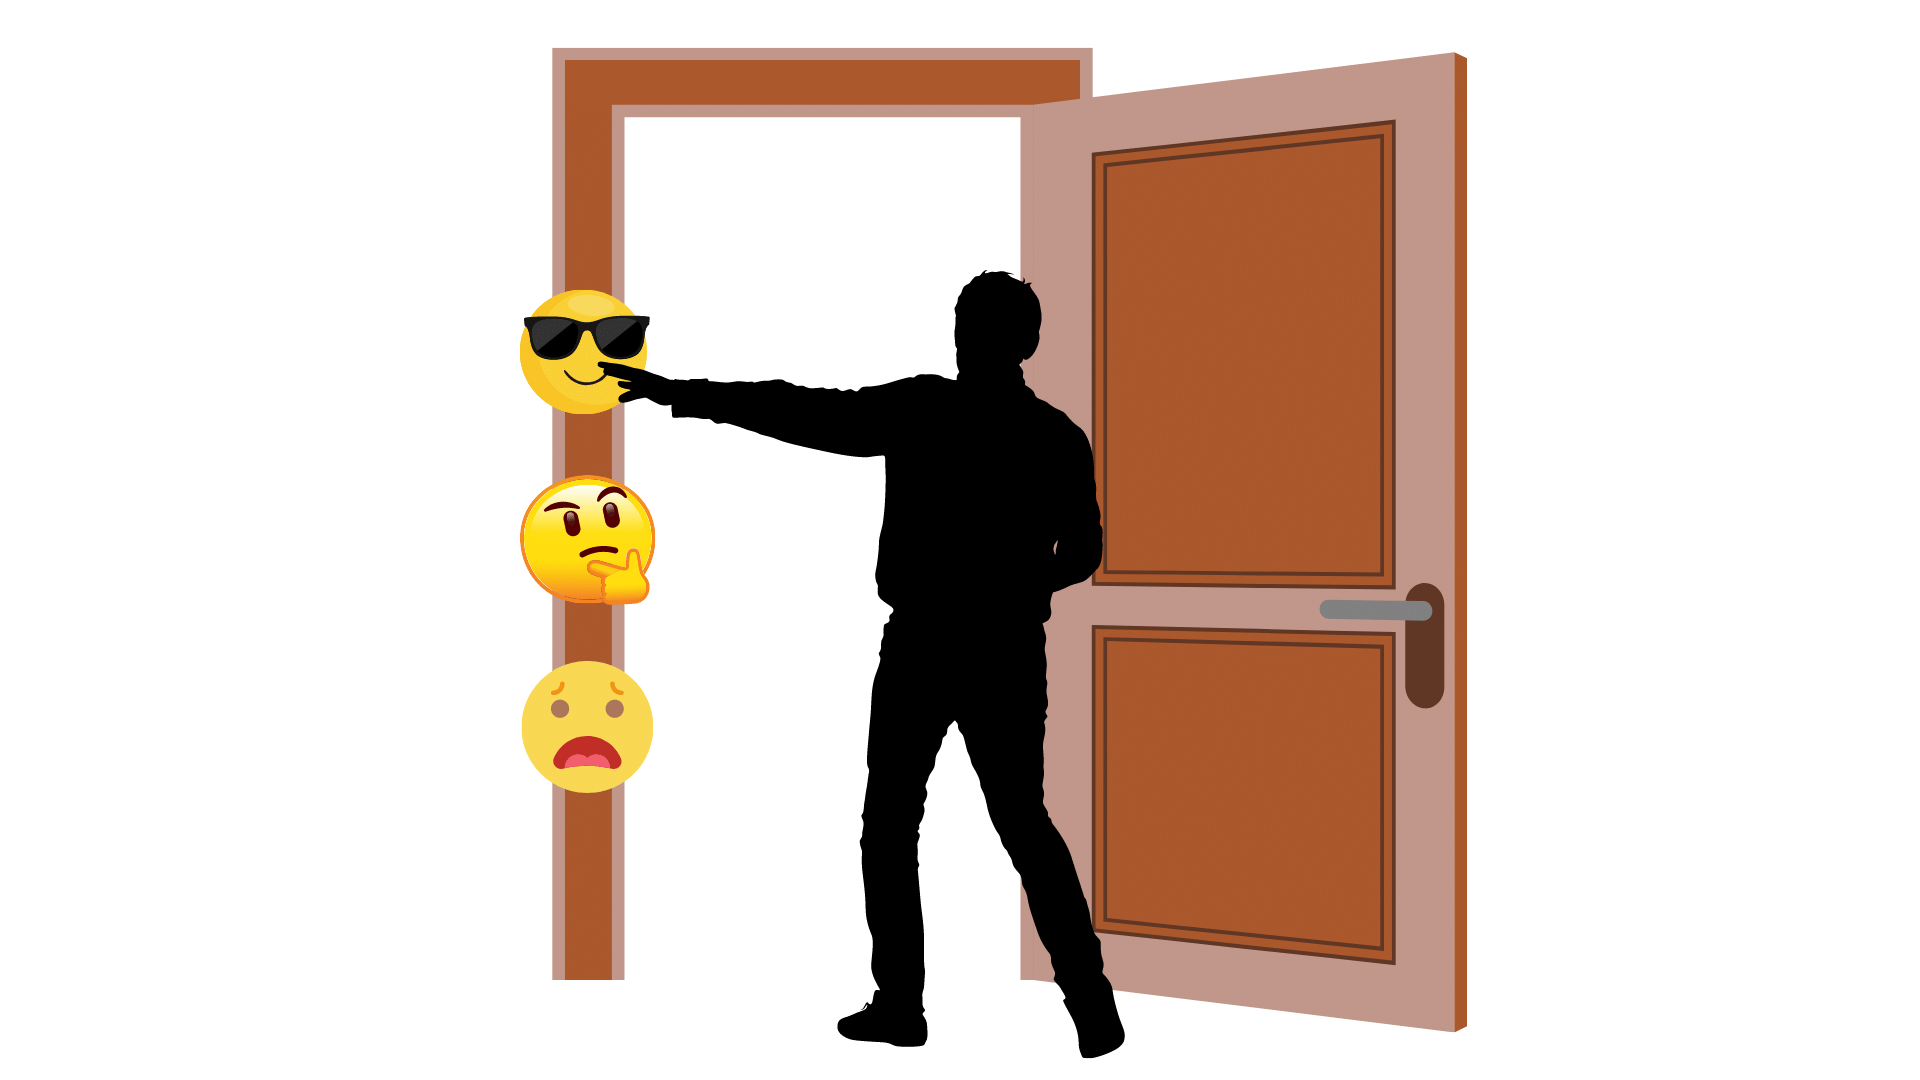 clipart of a brown door with 3 Emojis attached to the left door jamb- sunglasses Emoji, thinking Emoji, and worried Emoji. A male figure is touching the sunglasses Emoji with his left hand.